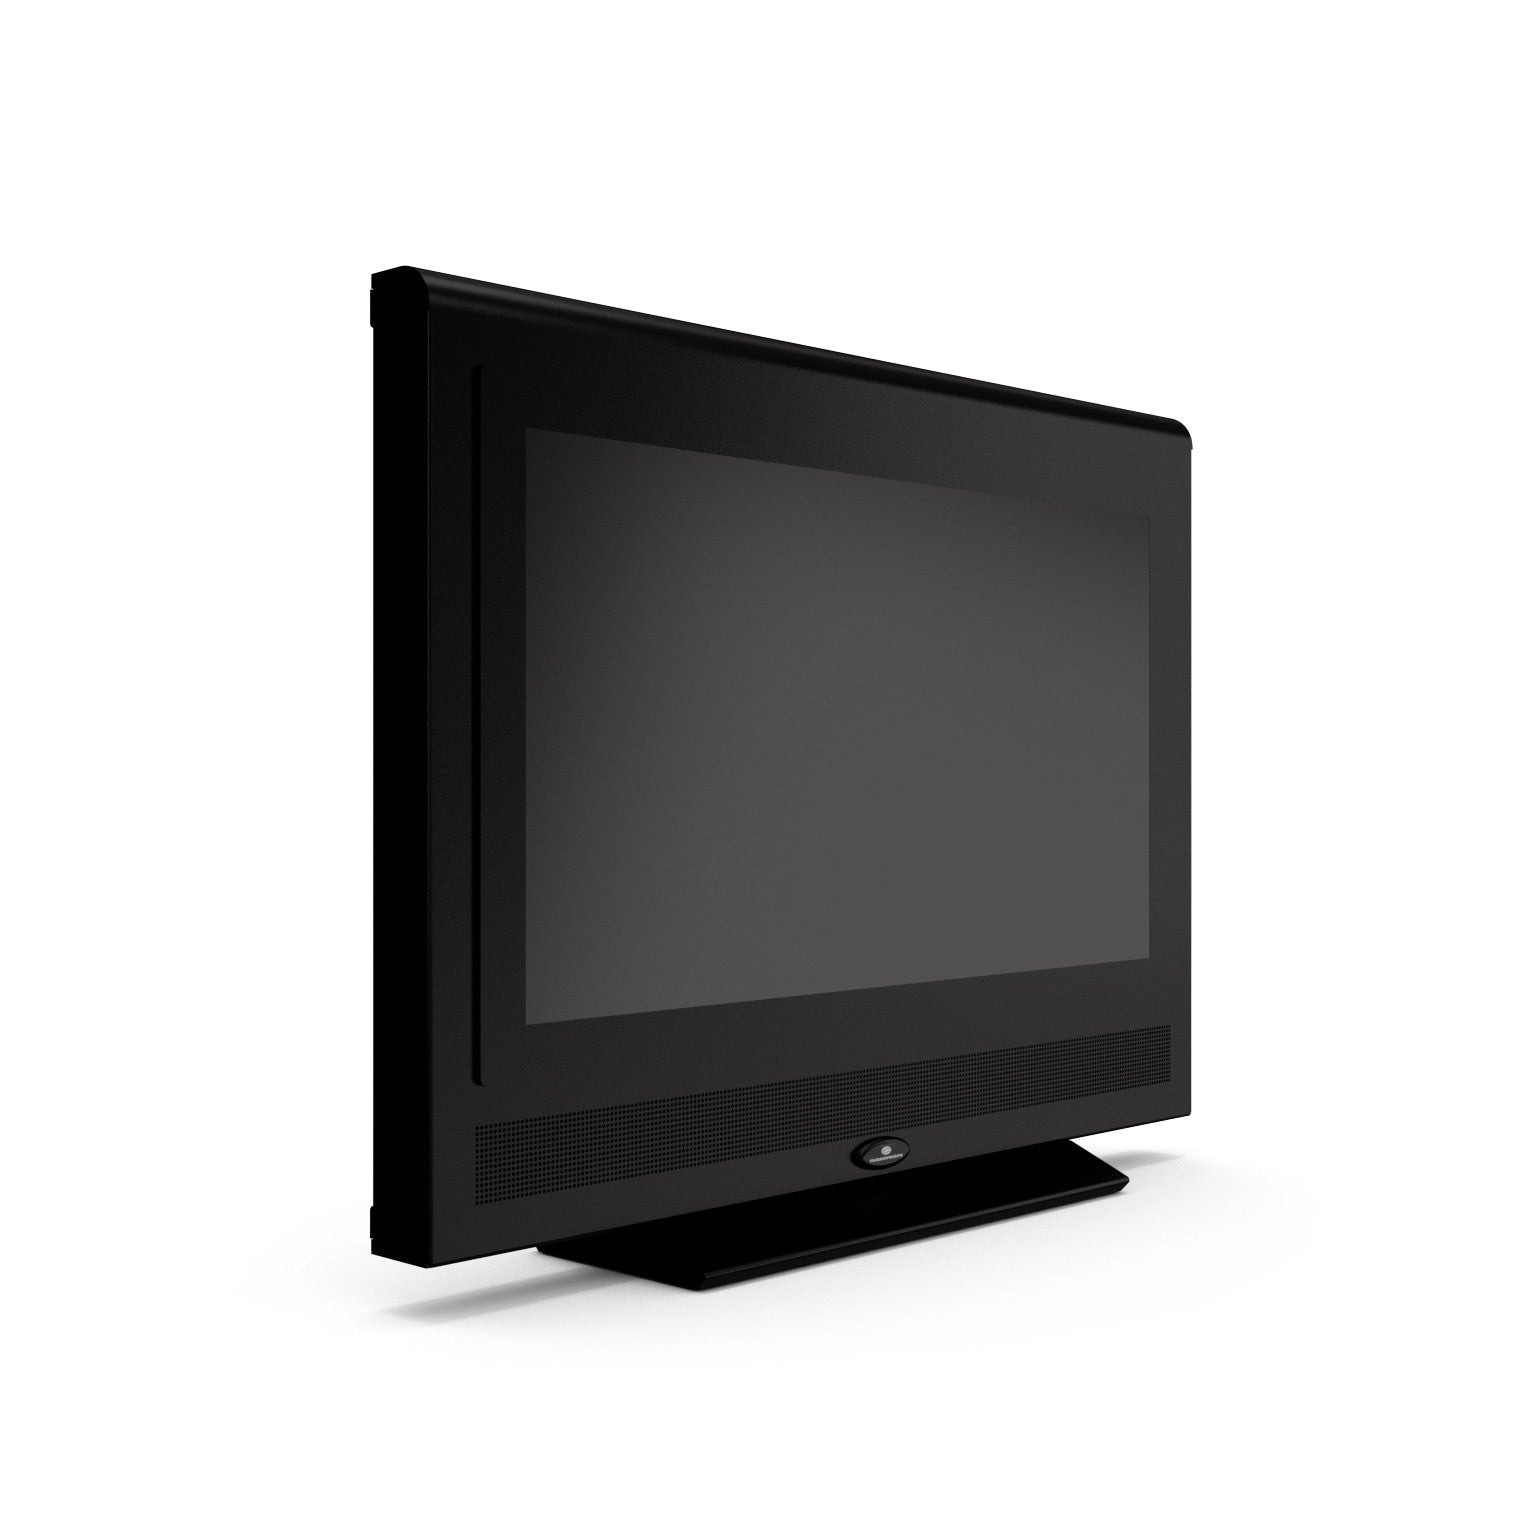 Turbo Elite 37 inch LCD TV prop with rounded top in high gloss black